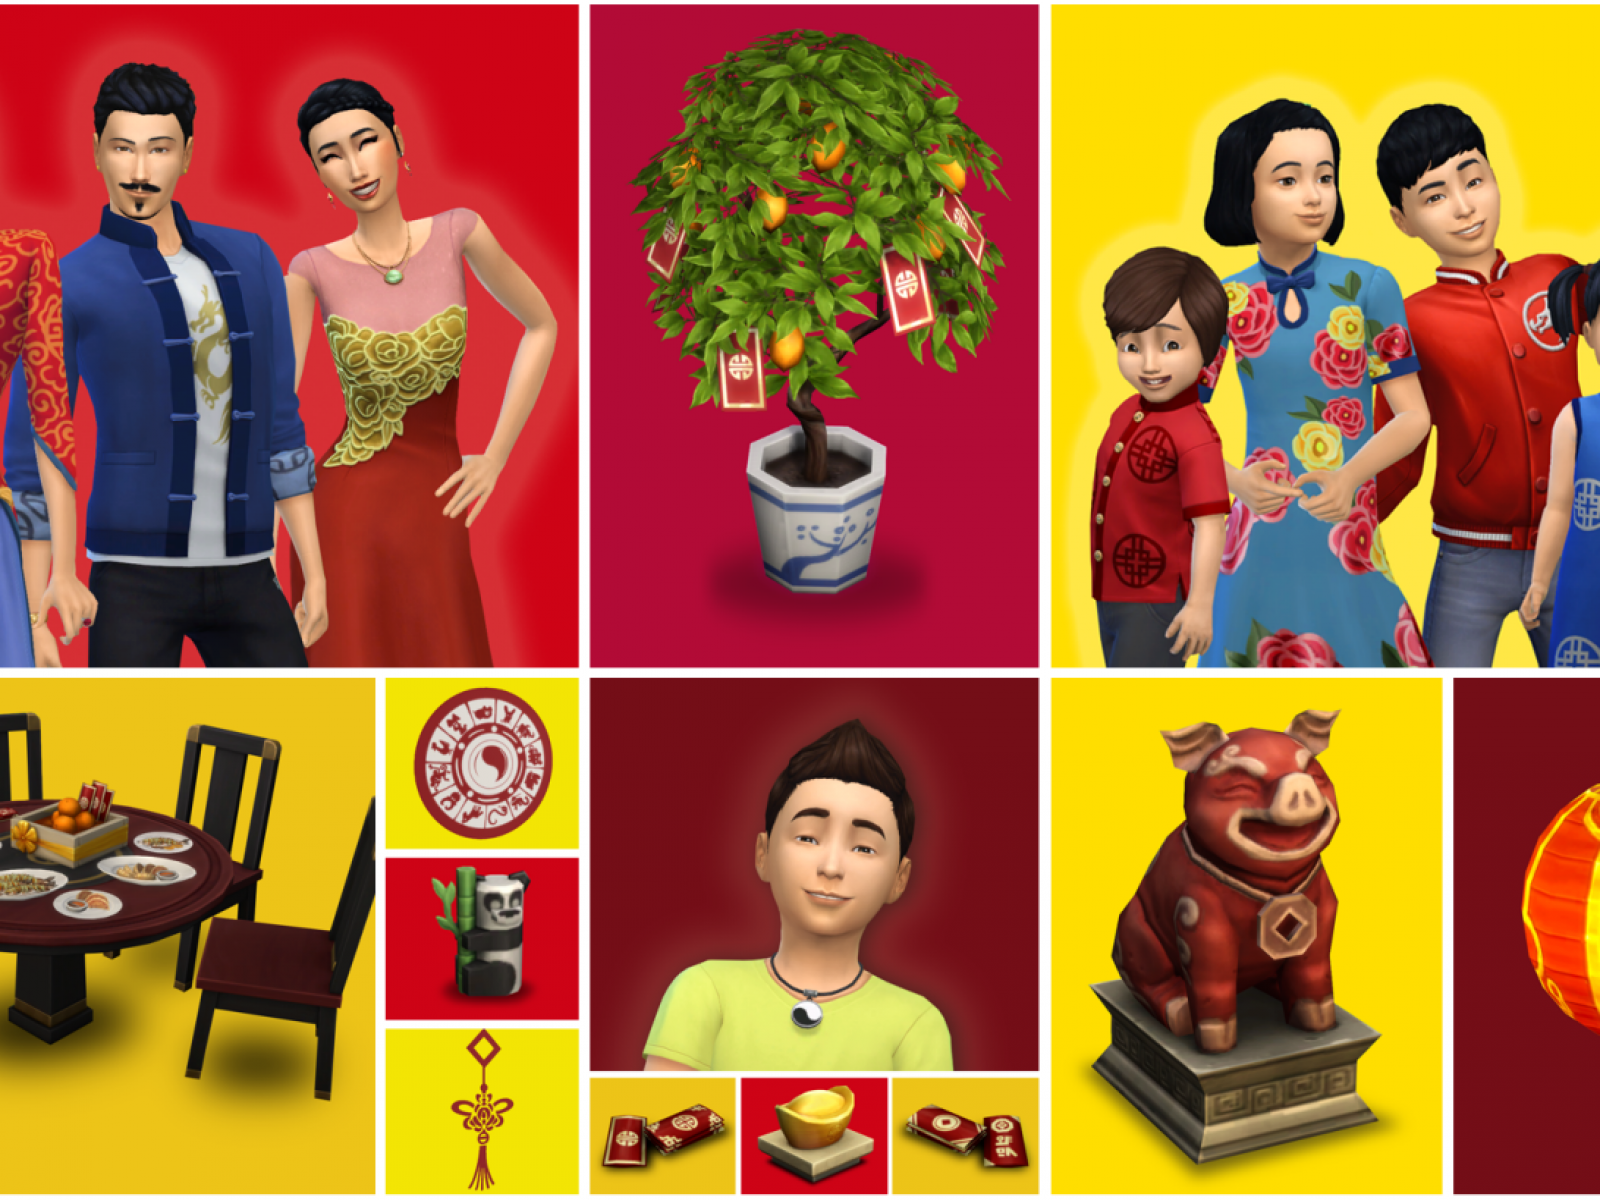 download the sims 4 latest version